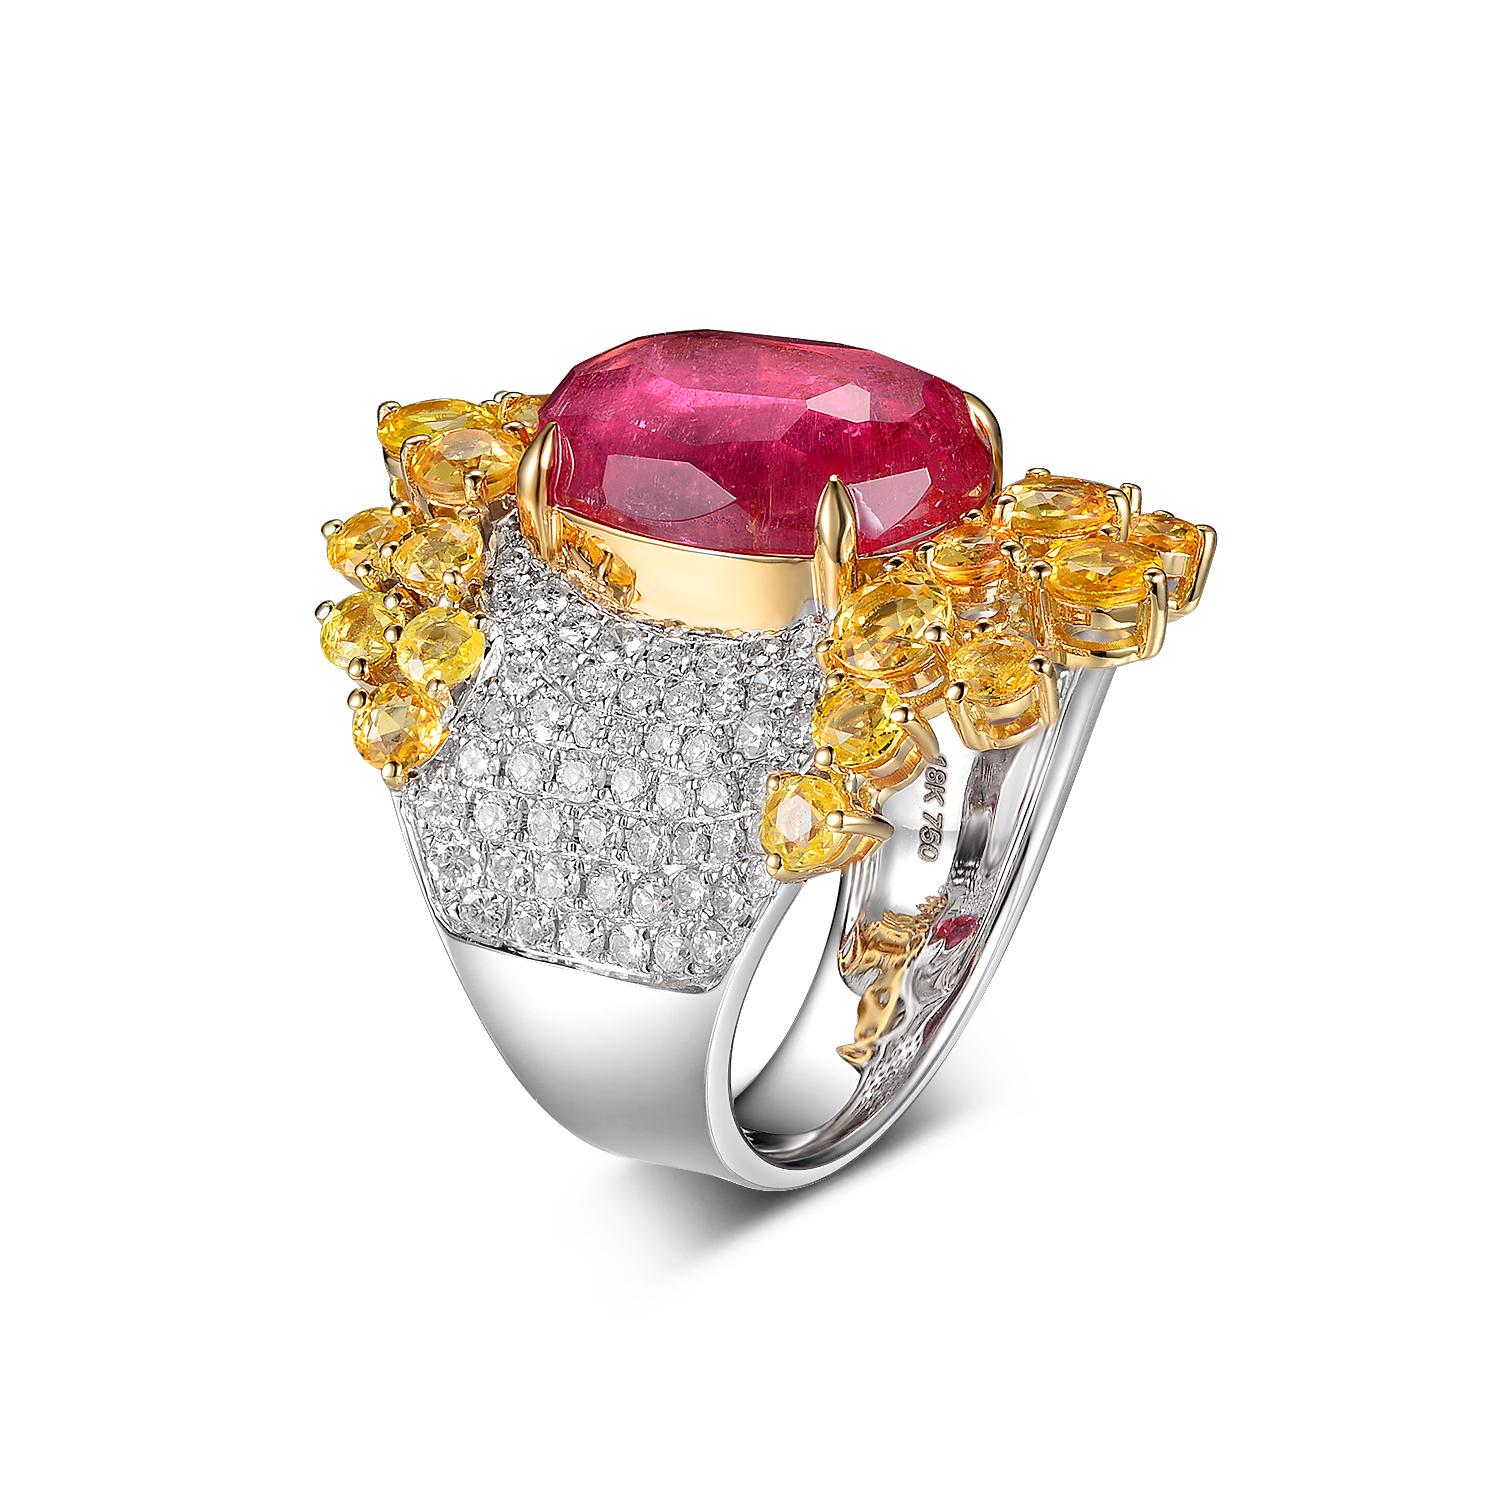 This ring features 4.92 carat of oval pink tourmaline assented with 2.87 carat of rose cut yellow sapphire and 1.13 carat of white round brilliance diamond. Retro cool yet timeless. 
Size 6.5
Complimentary sizing as needed

Pink tourmaline 4.92